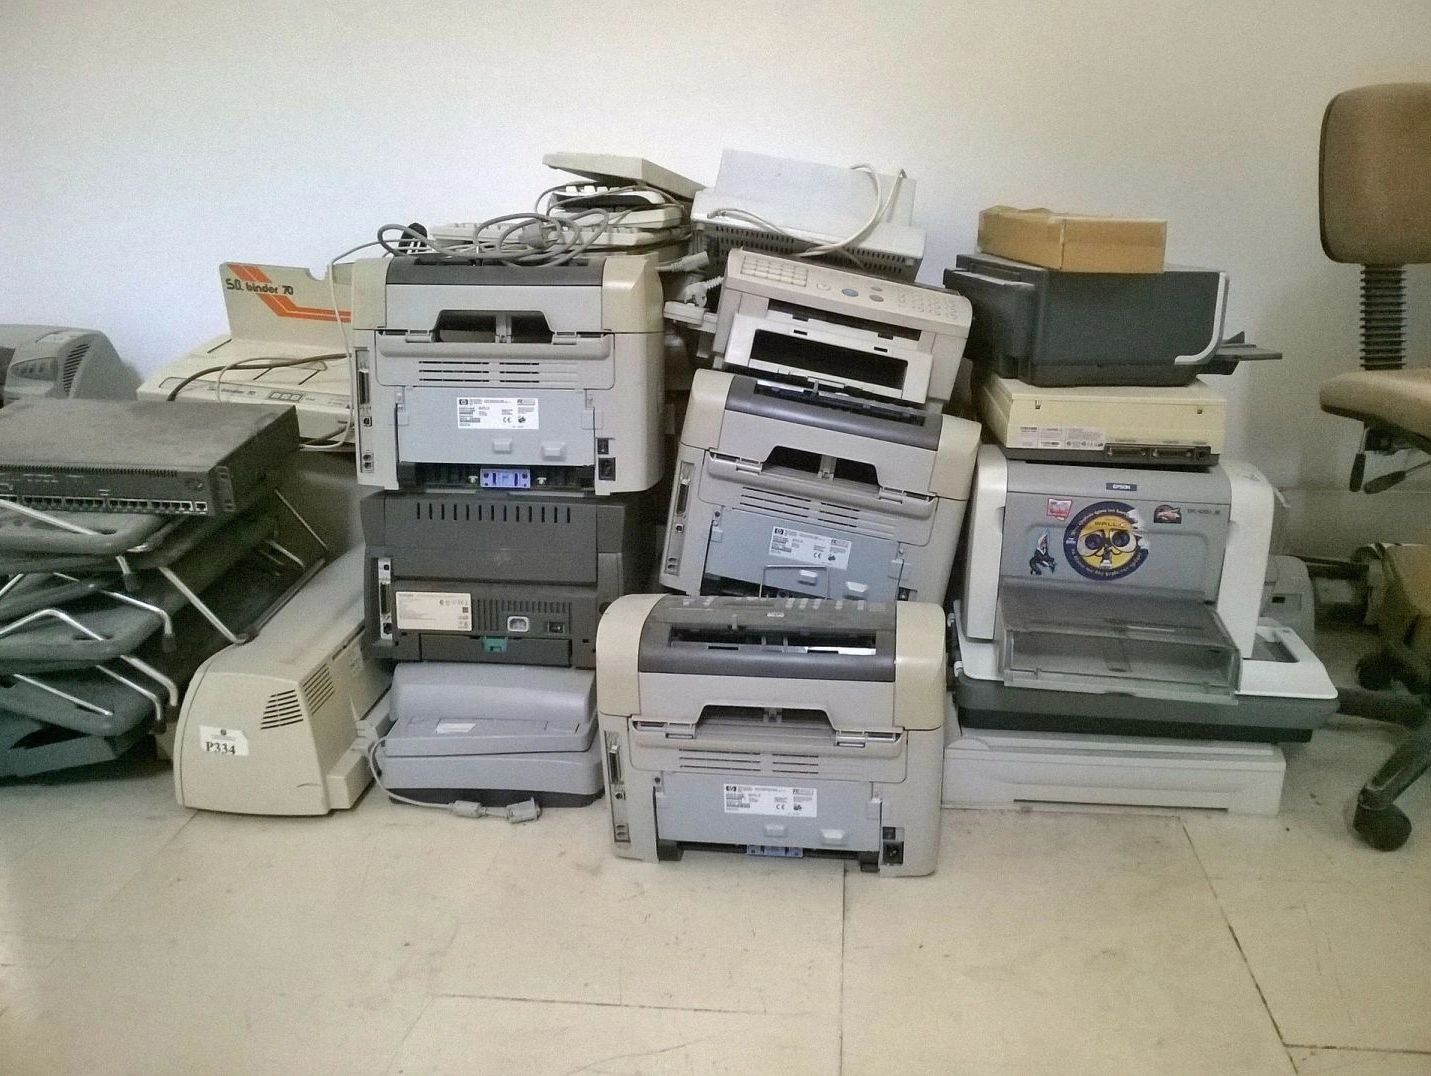 A pile of old printers